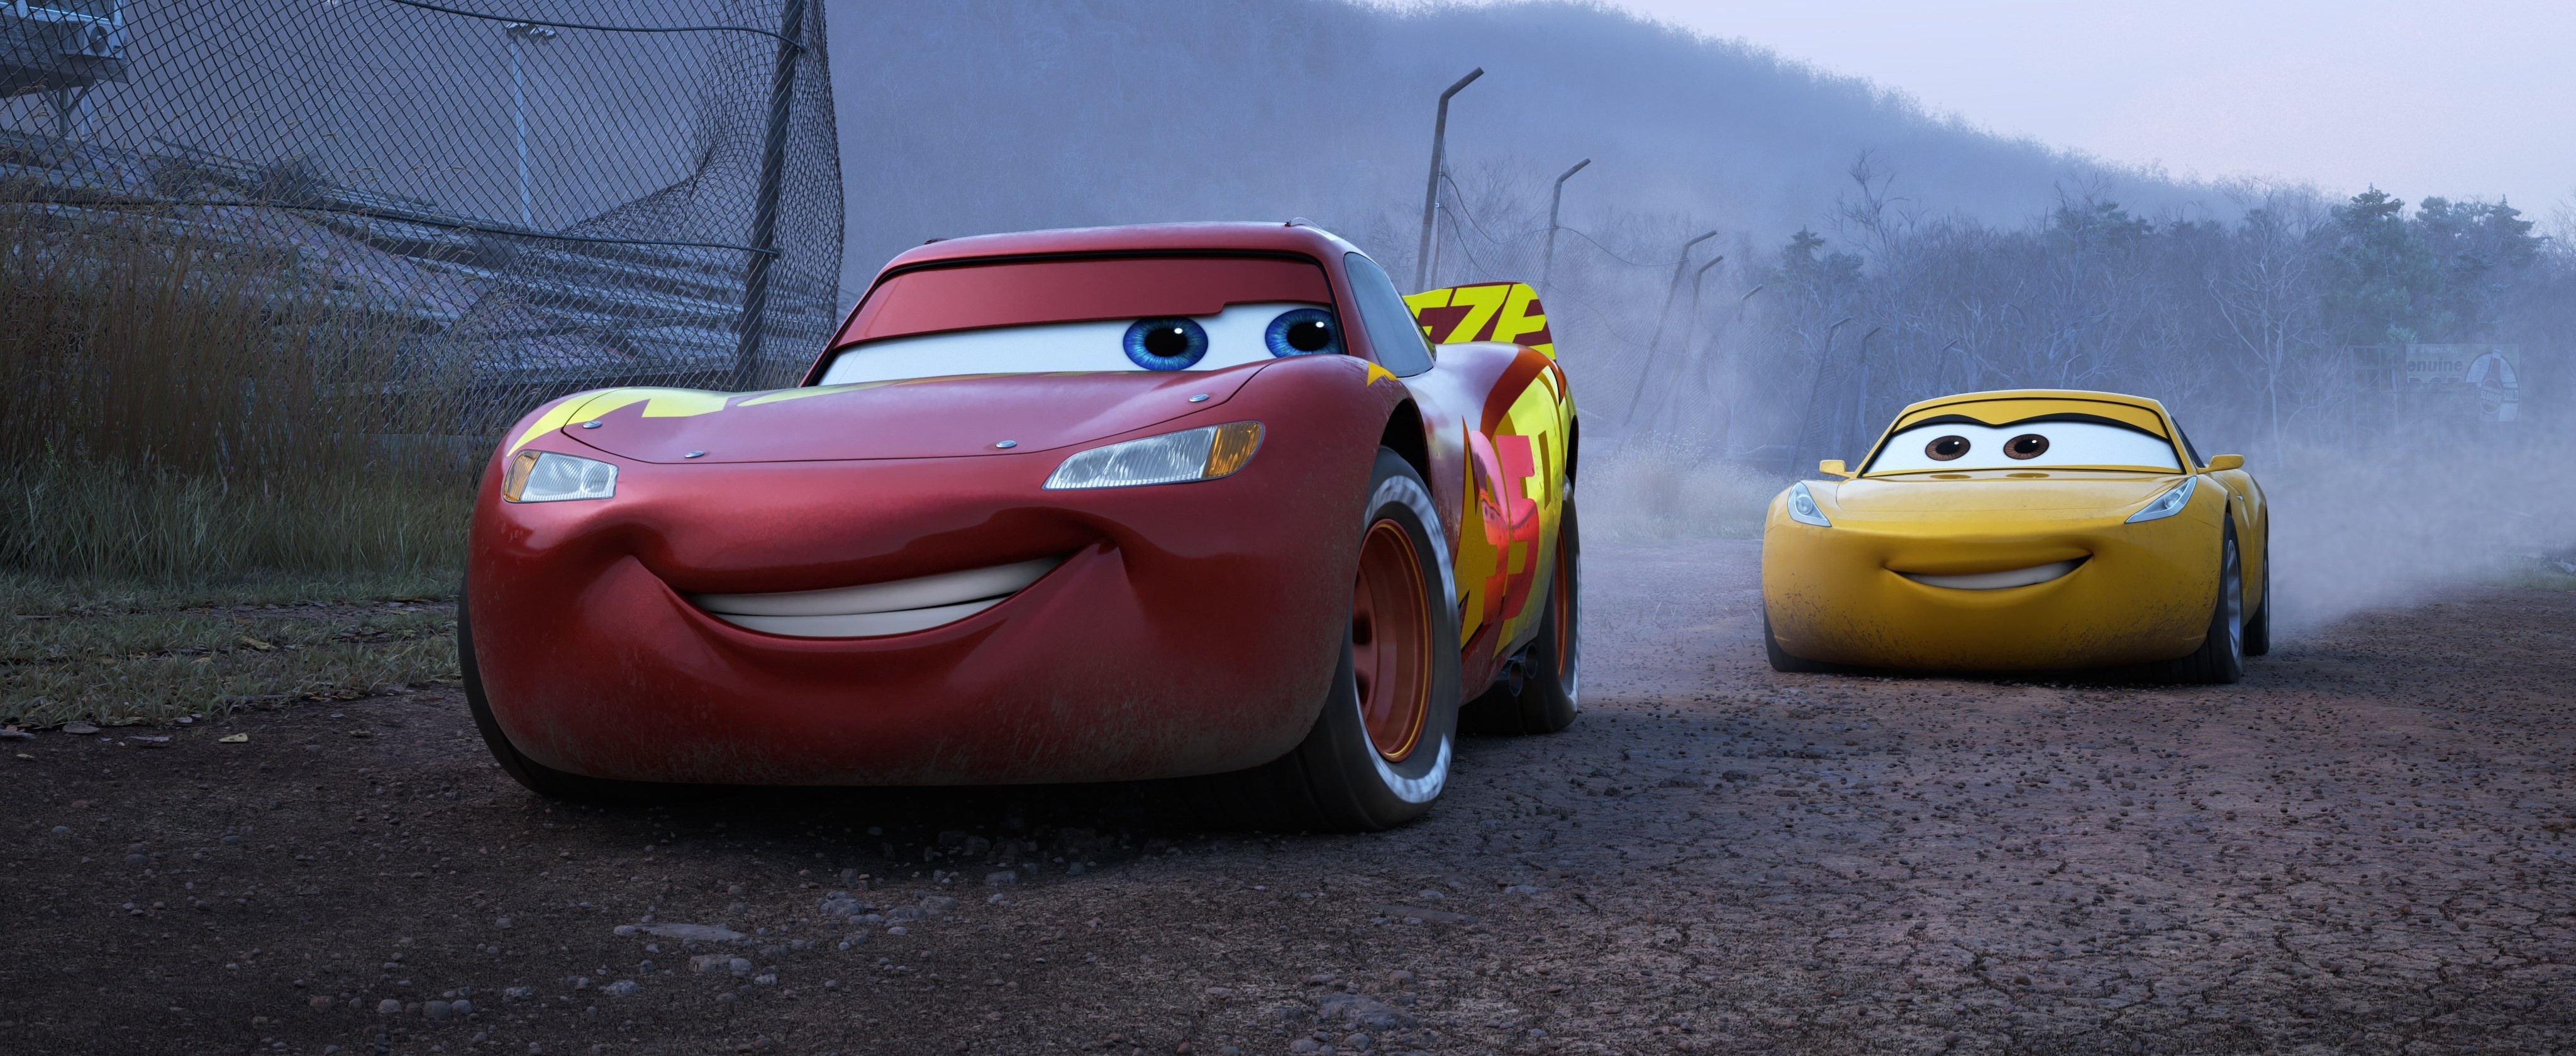 lightning mcqueen, cars 3, movie wallpapers for tablet